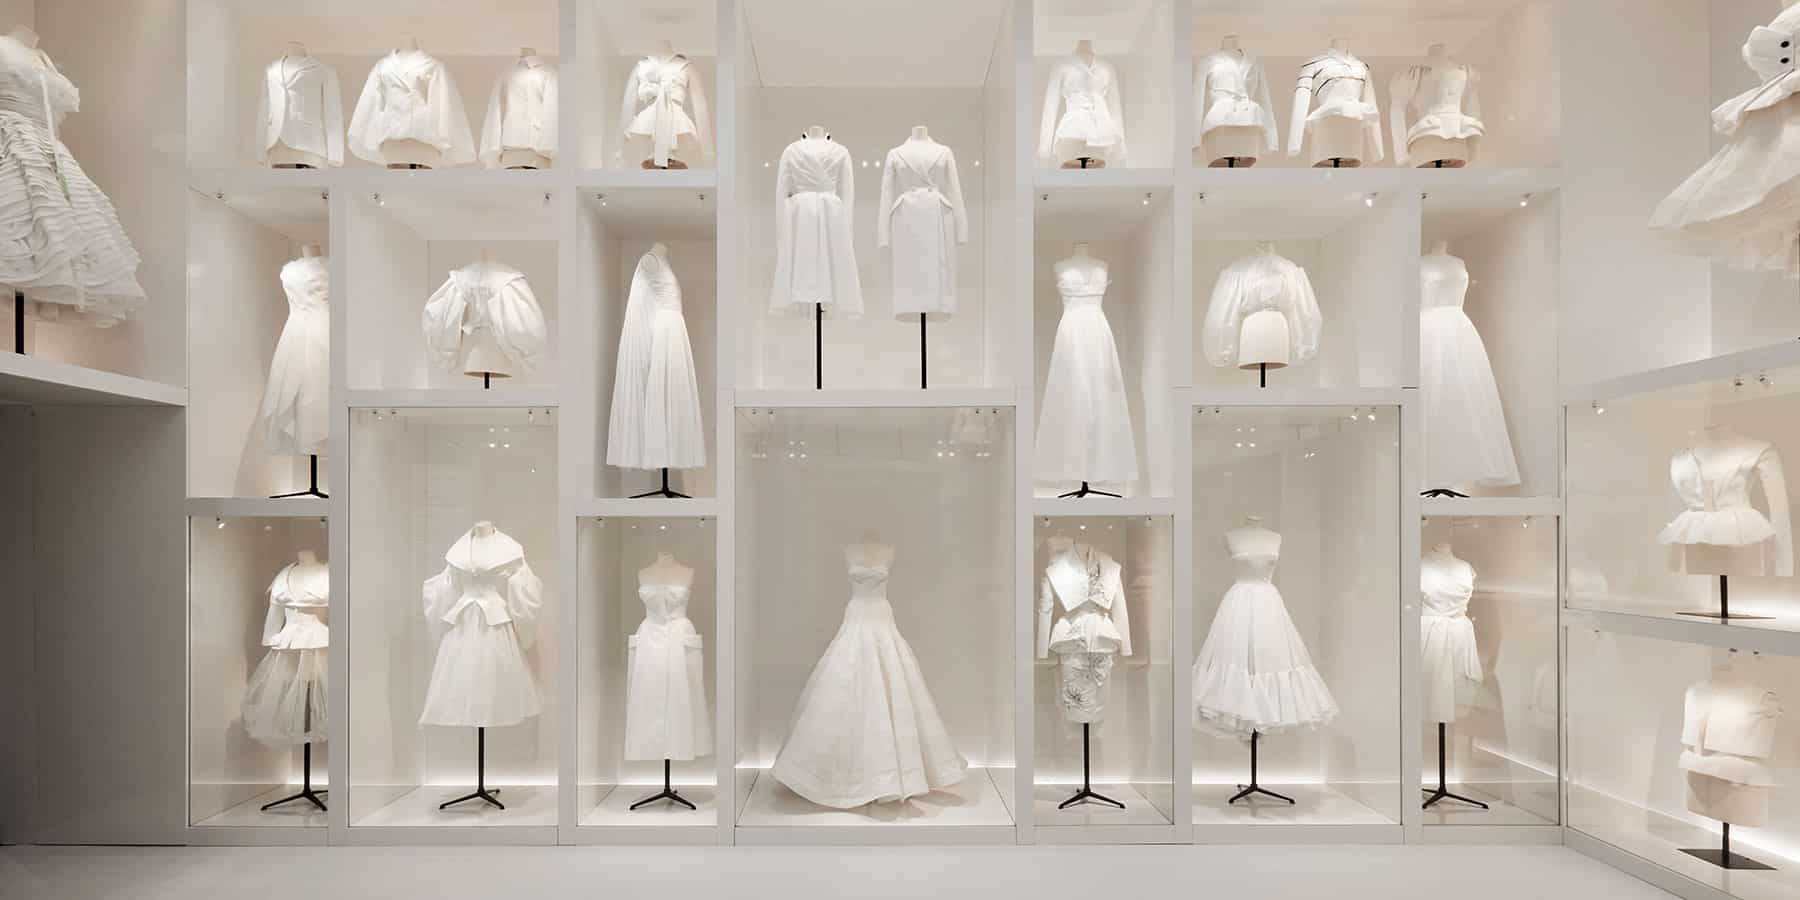 Dior Haute Couture Window Display Stock Photo - Download Image Now